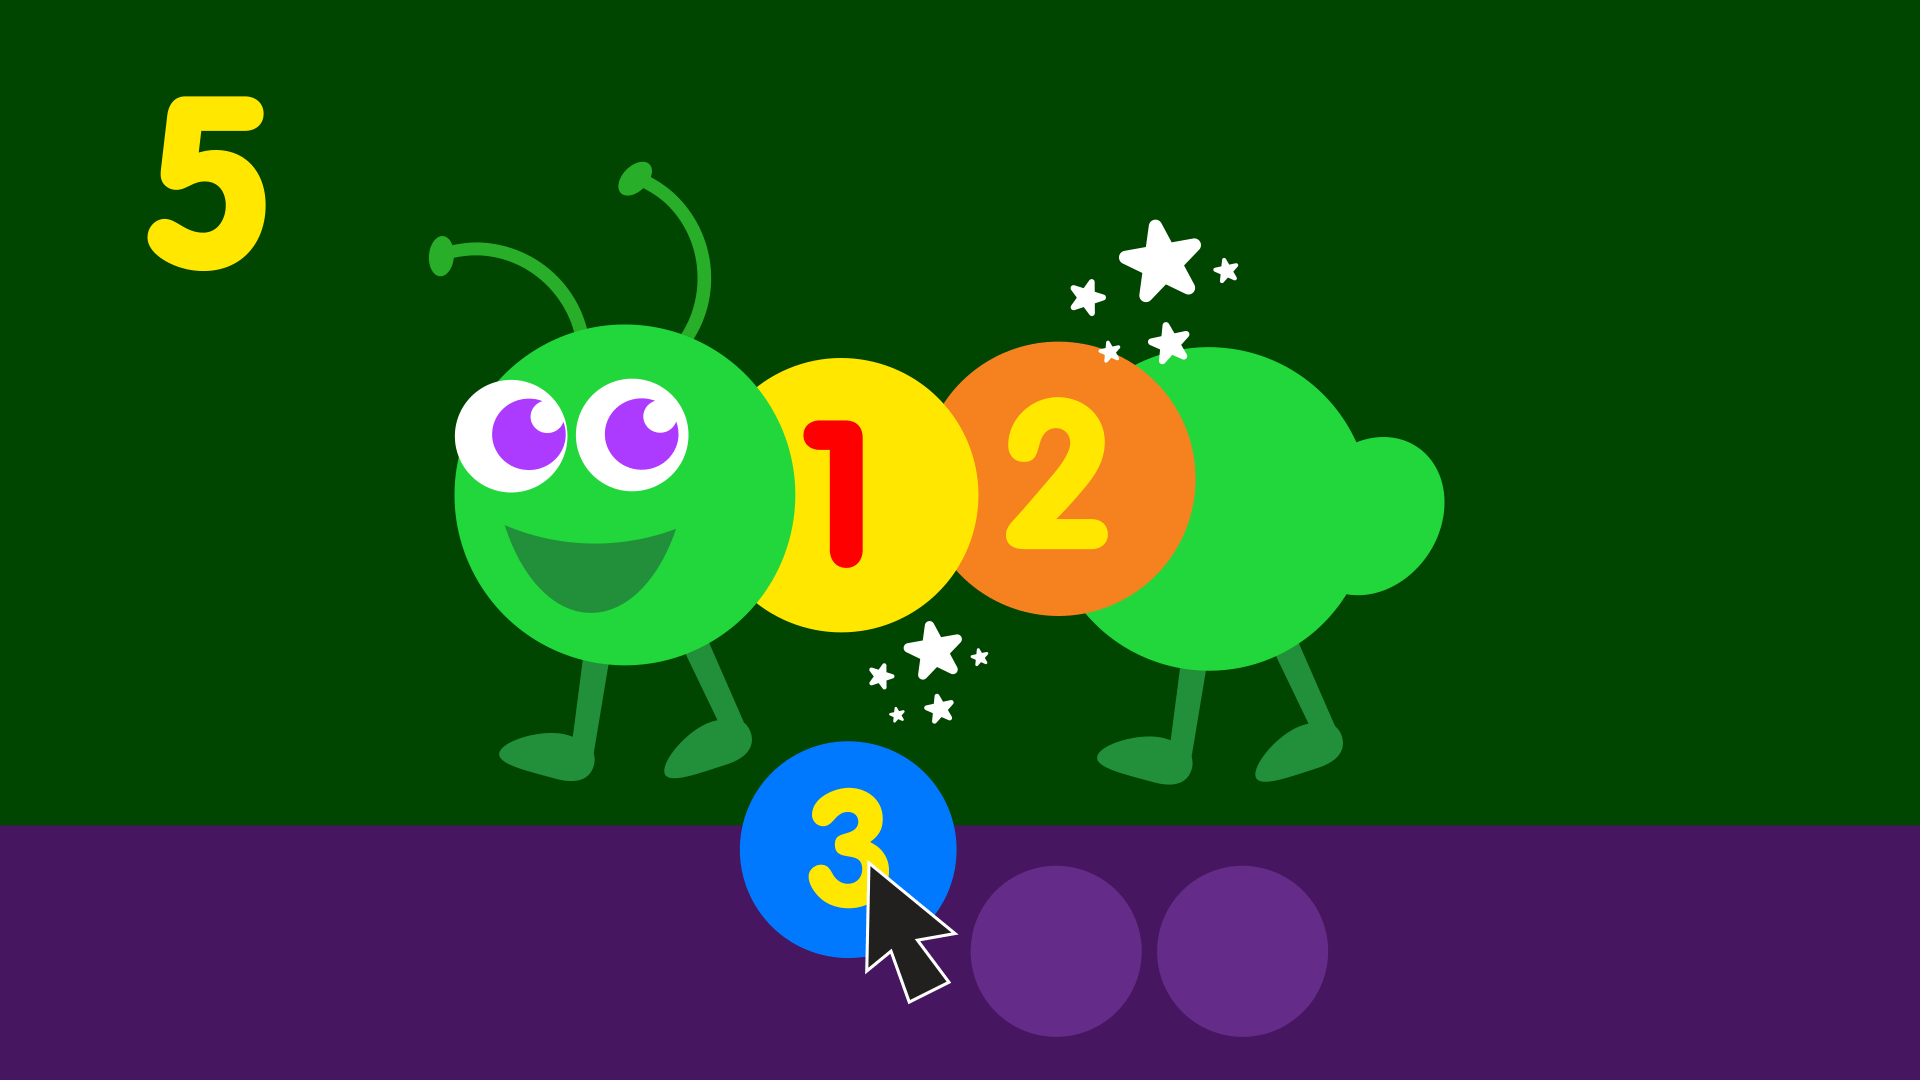 Preschool game, learn numbers, learn counting, bug game counting